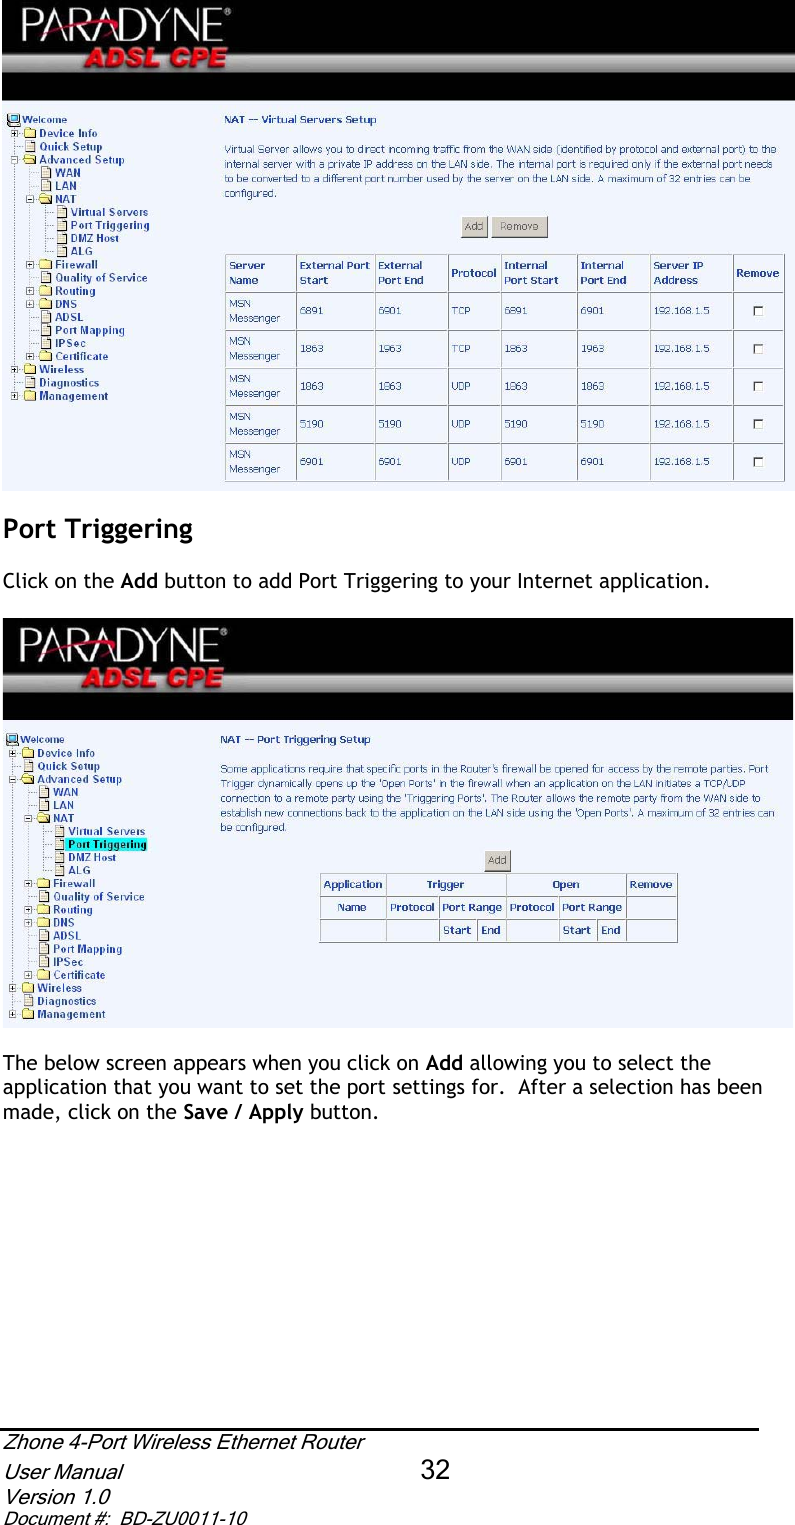 Port Triggering  Click on the Add button to add Port Triggering to your Internet application.  The below screen appears when you click on Add allowing you to select the application that you want to set the port settings for.  After a selection has been made, click on the Save / Apply button.Zhone 4-Port Wireless Ethernet Router User Manual 32Version 1.0 Document #:  BD-ZU0011-10